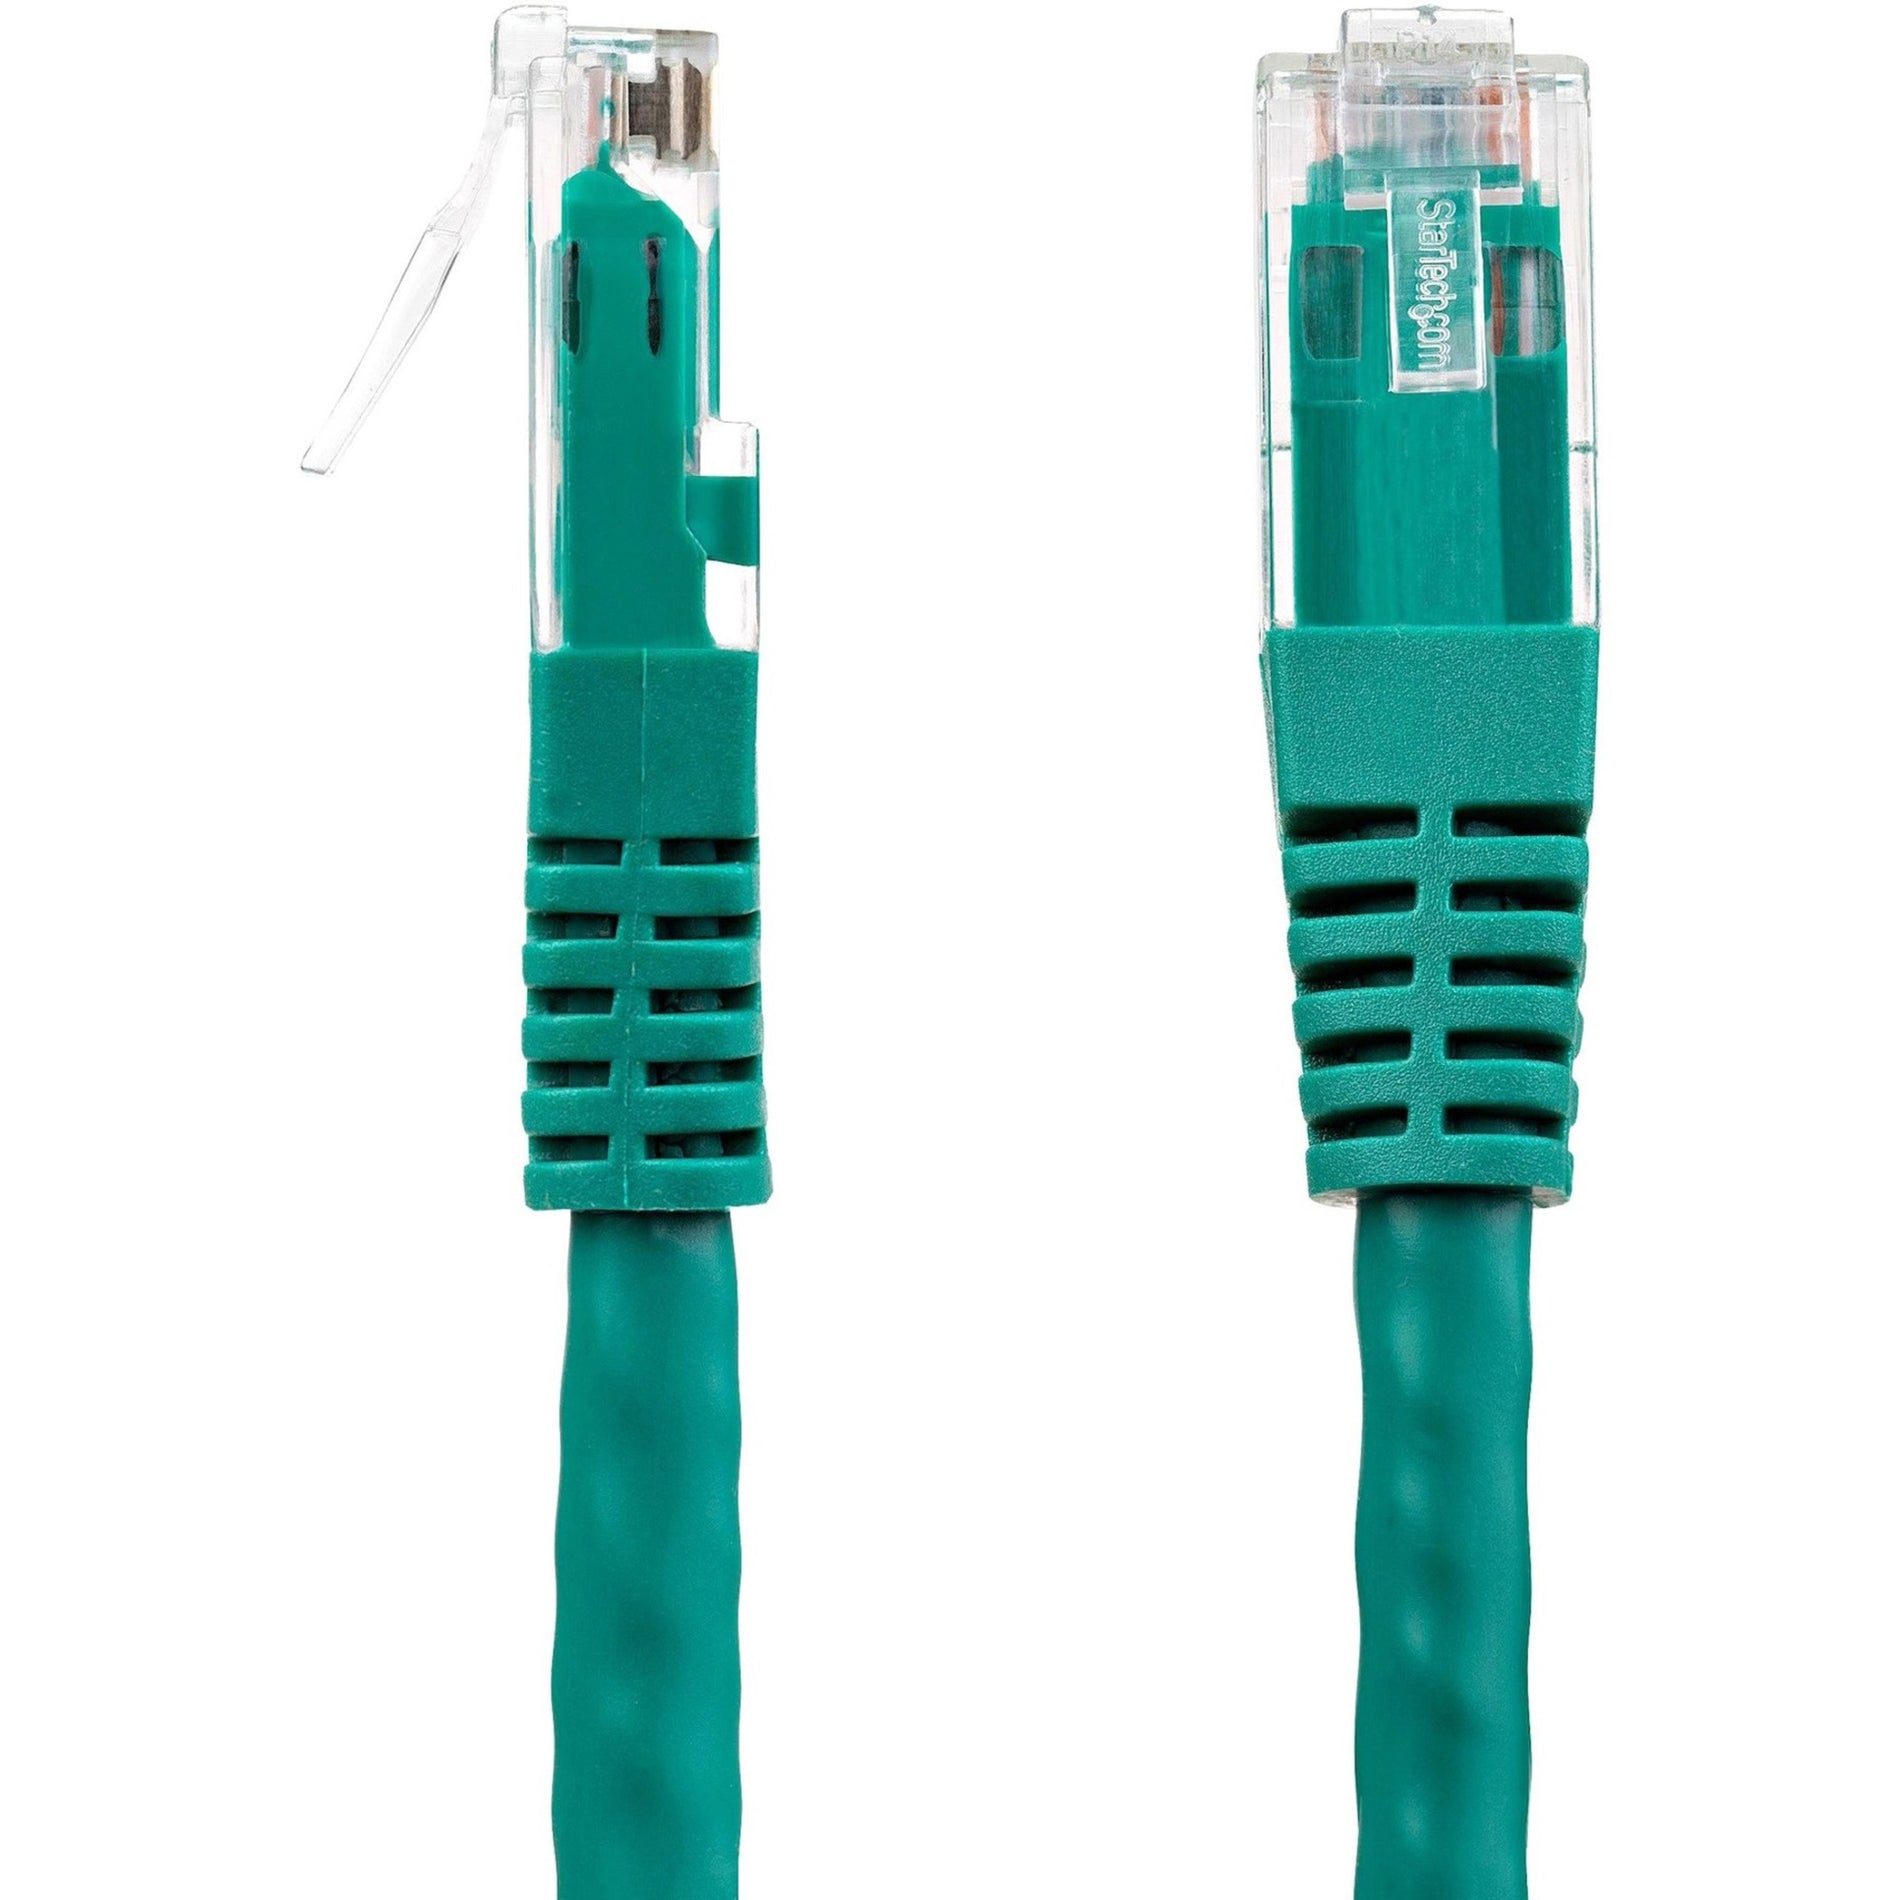 StarTech.com C6PATCH6GN 6ft Green Cat6 UTP Patch Cable ETL Verified, 10 Gbit/s Data Transfer Rate, Strain Relief, Gold Plated Connectors